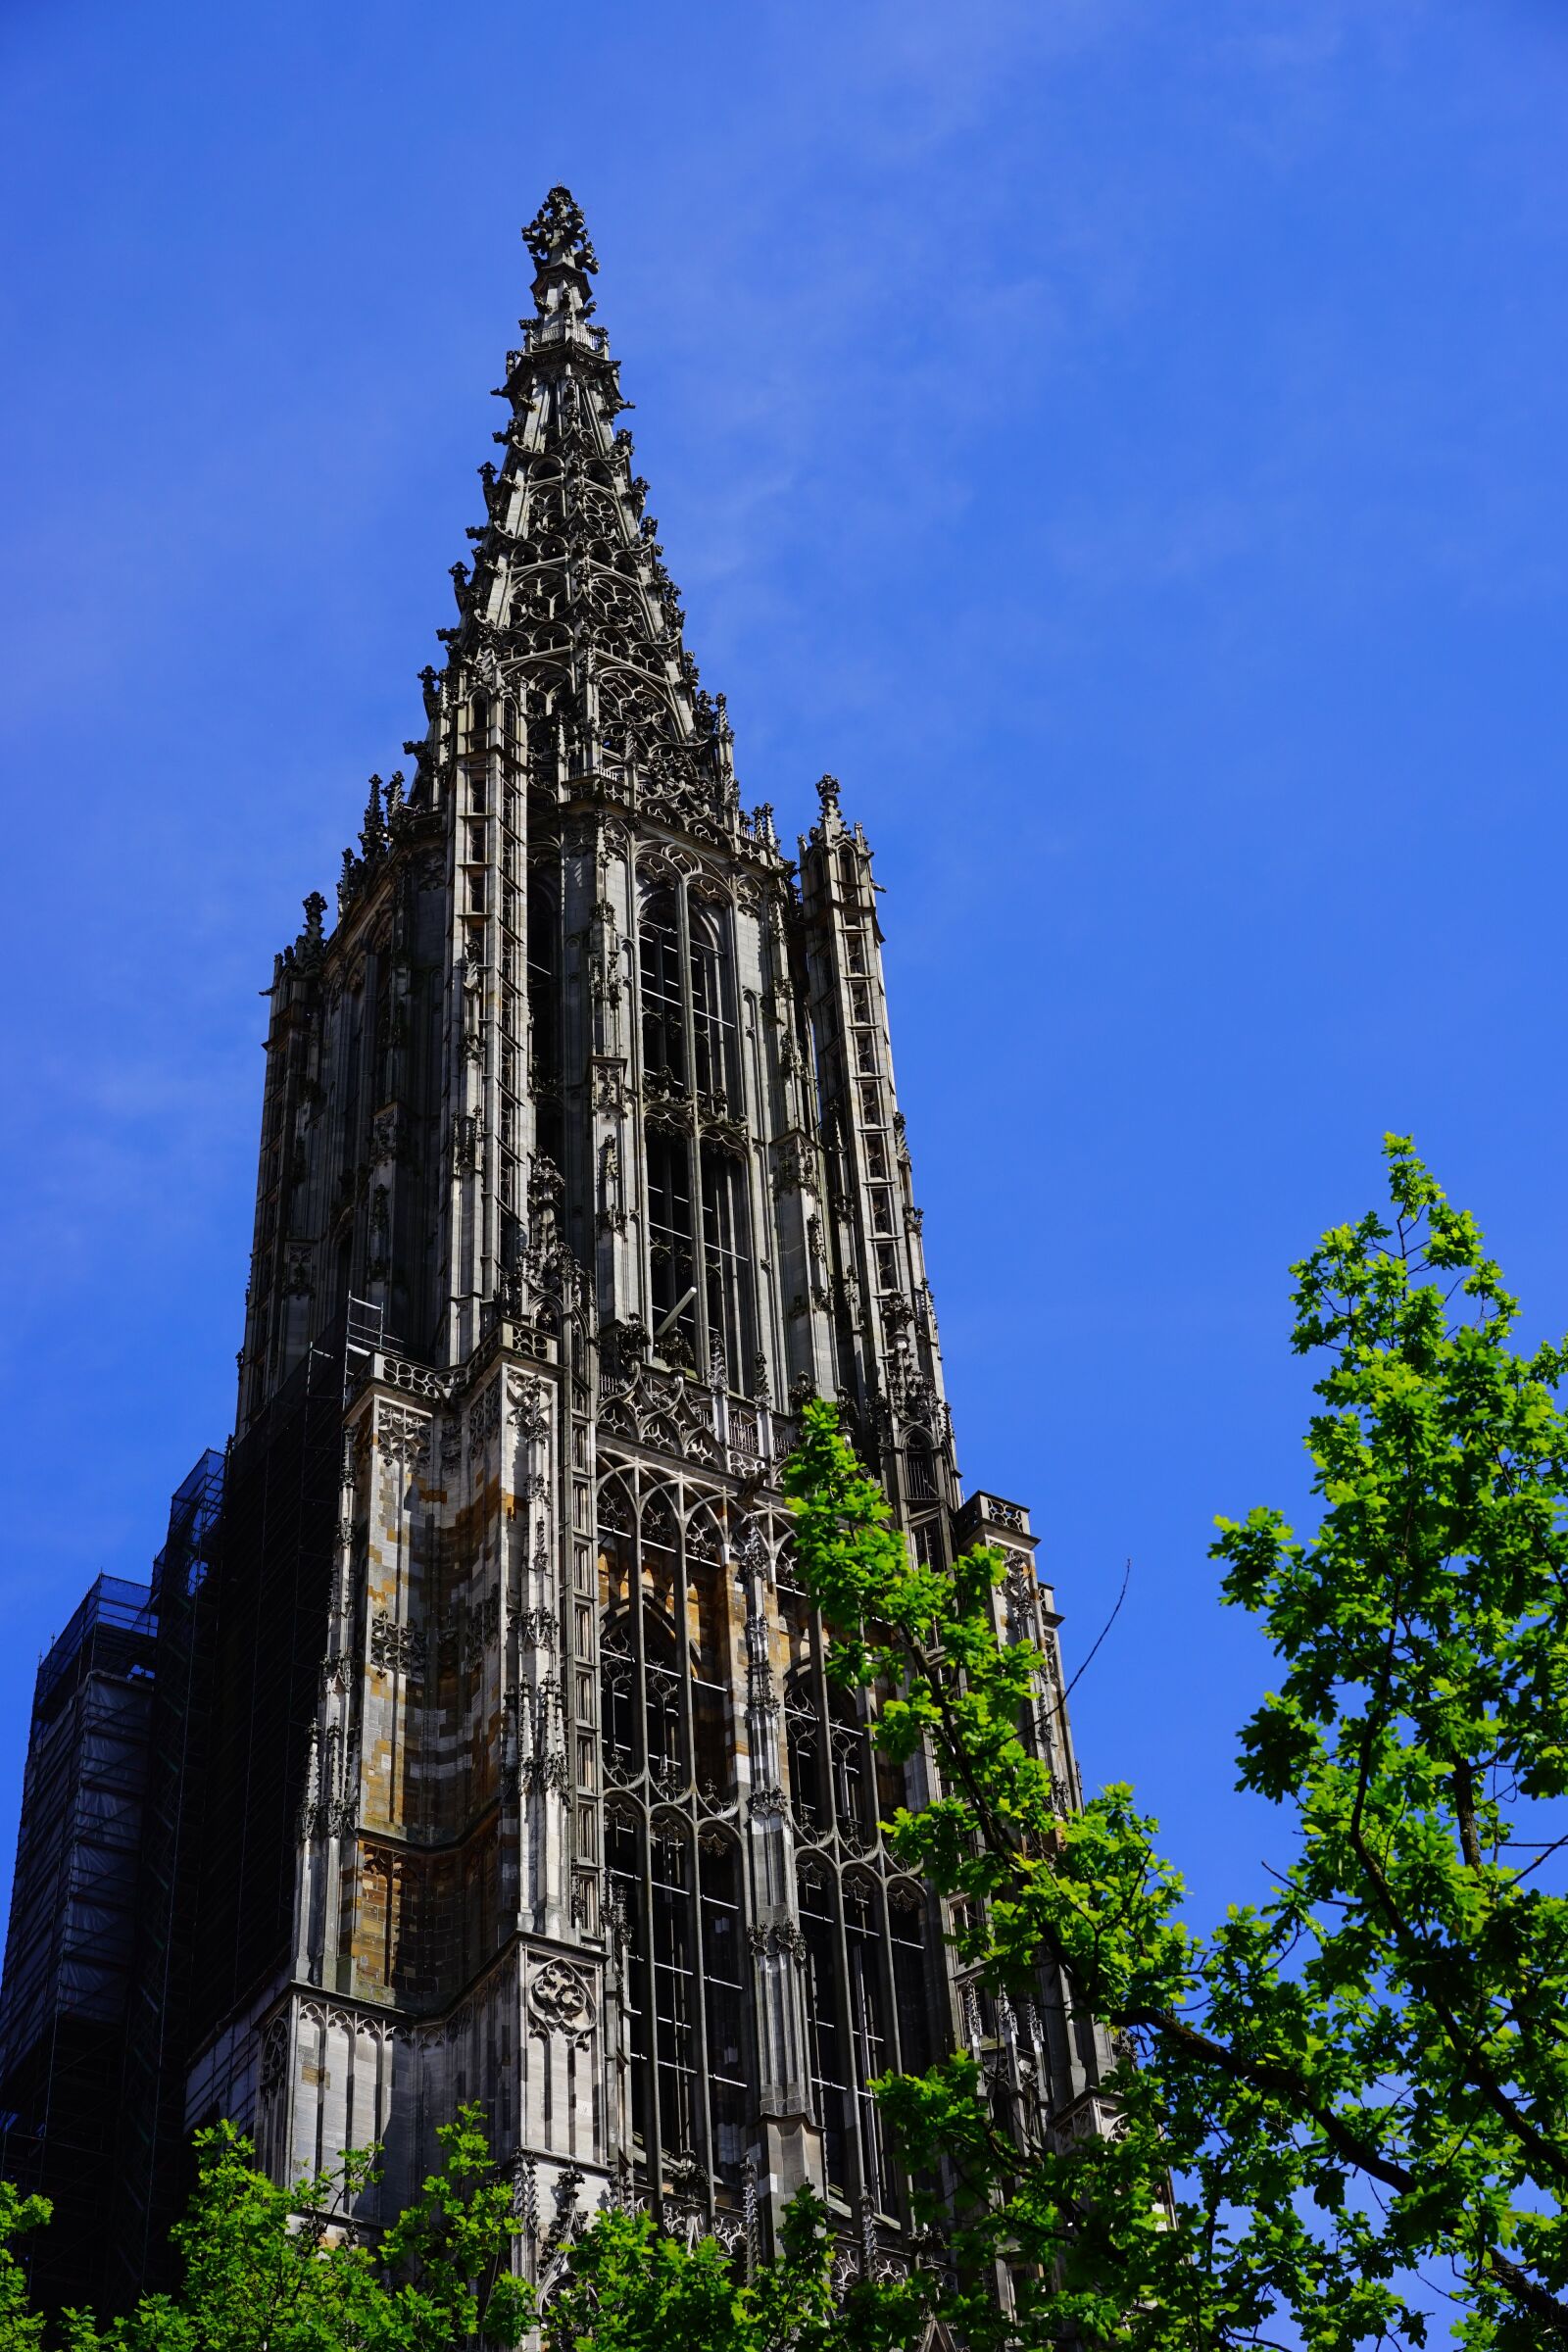 Sony a7 sample photo. Ulm cathedral, m nster photography